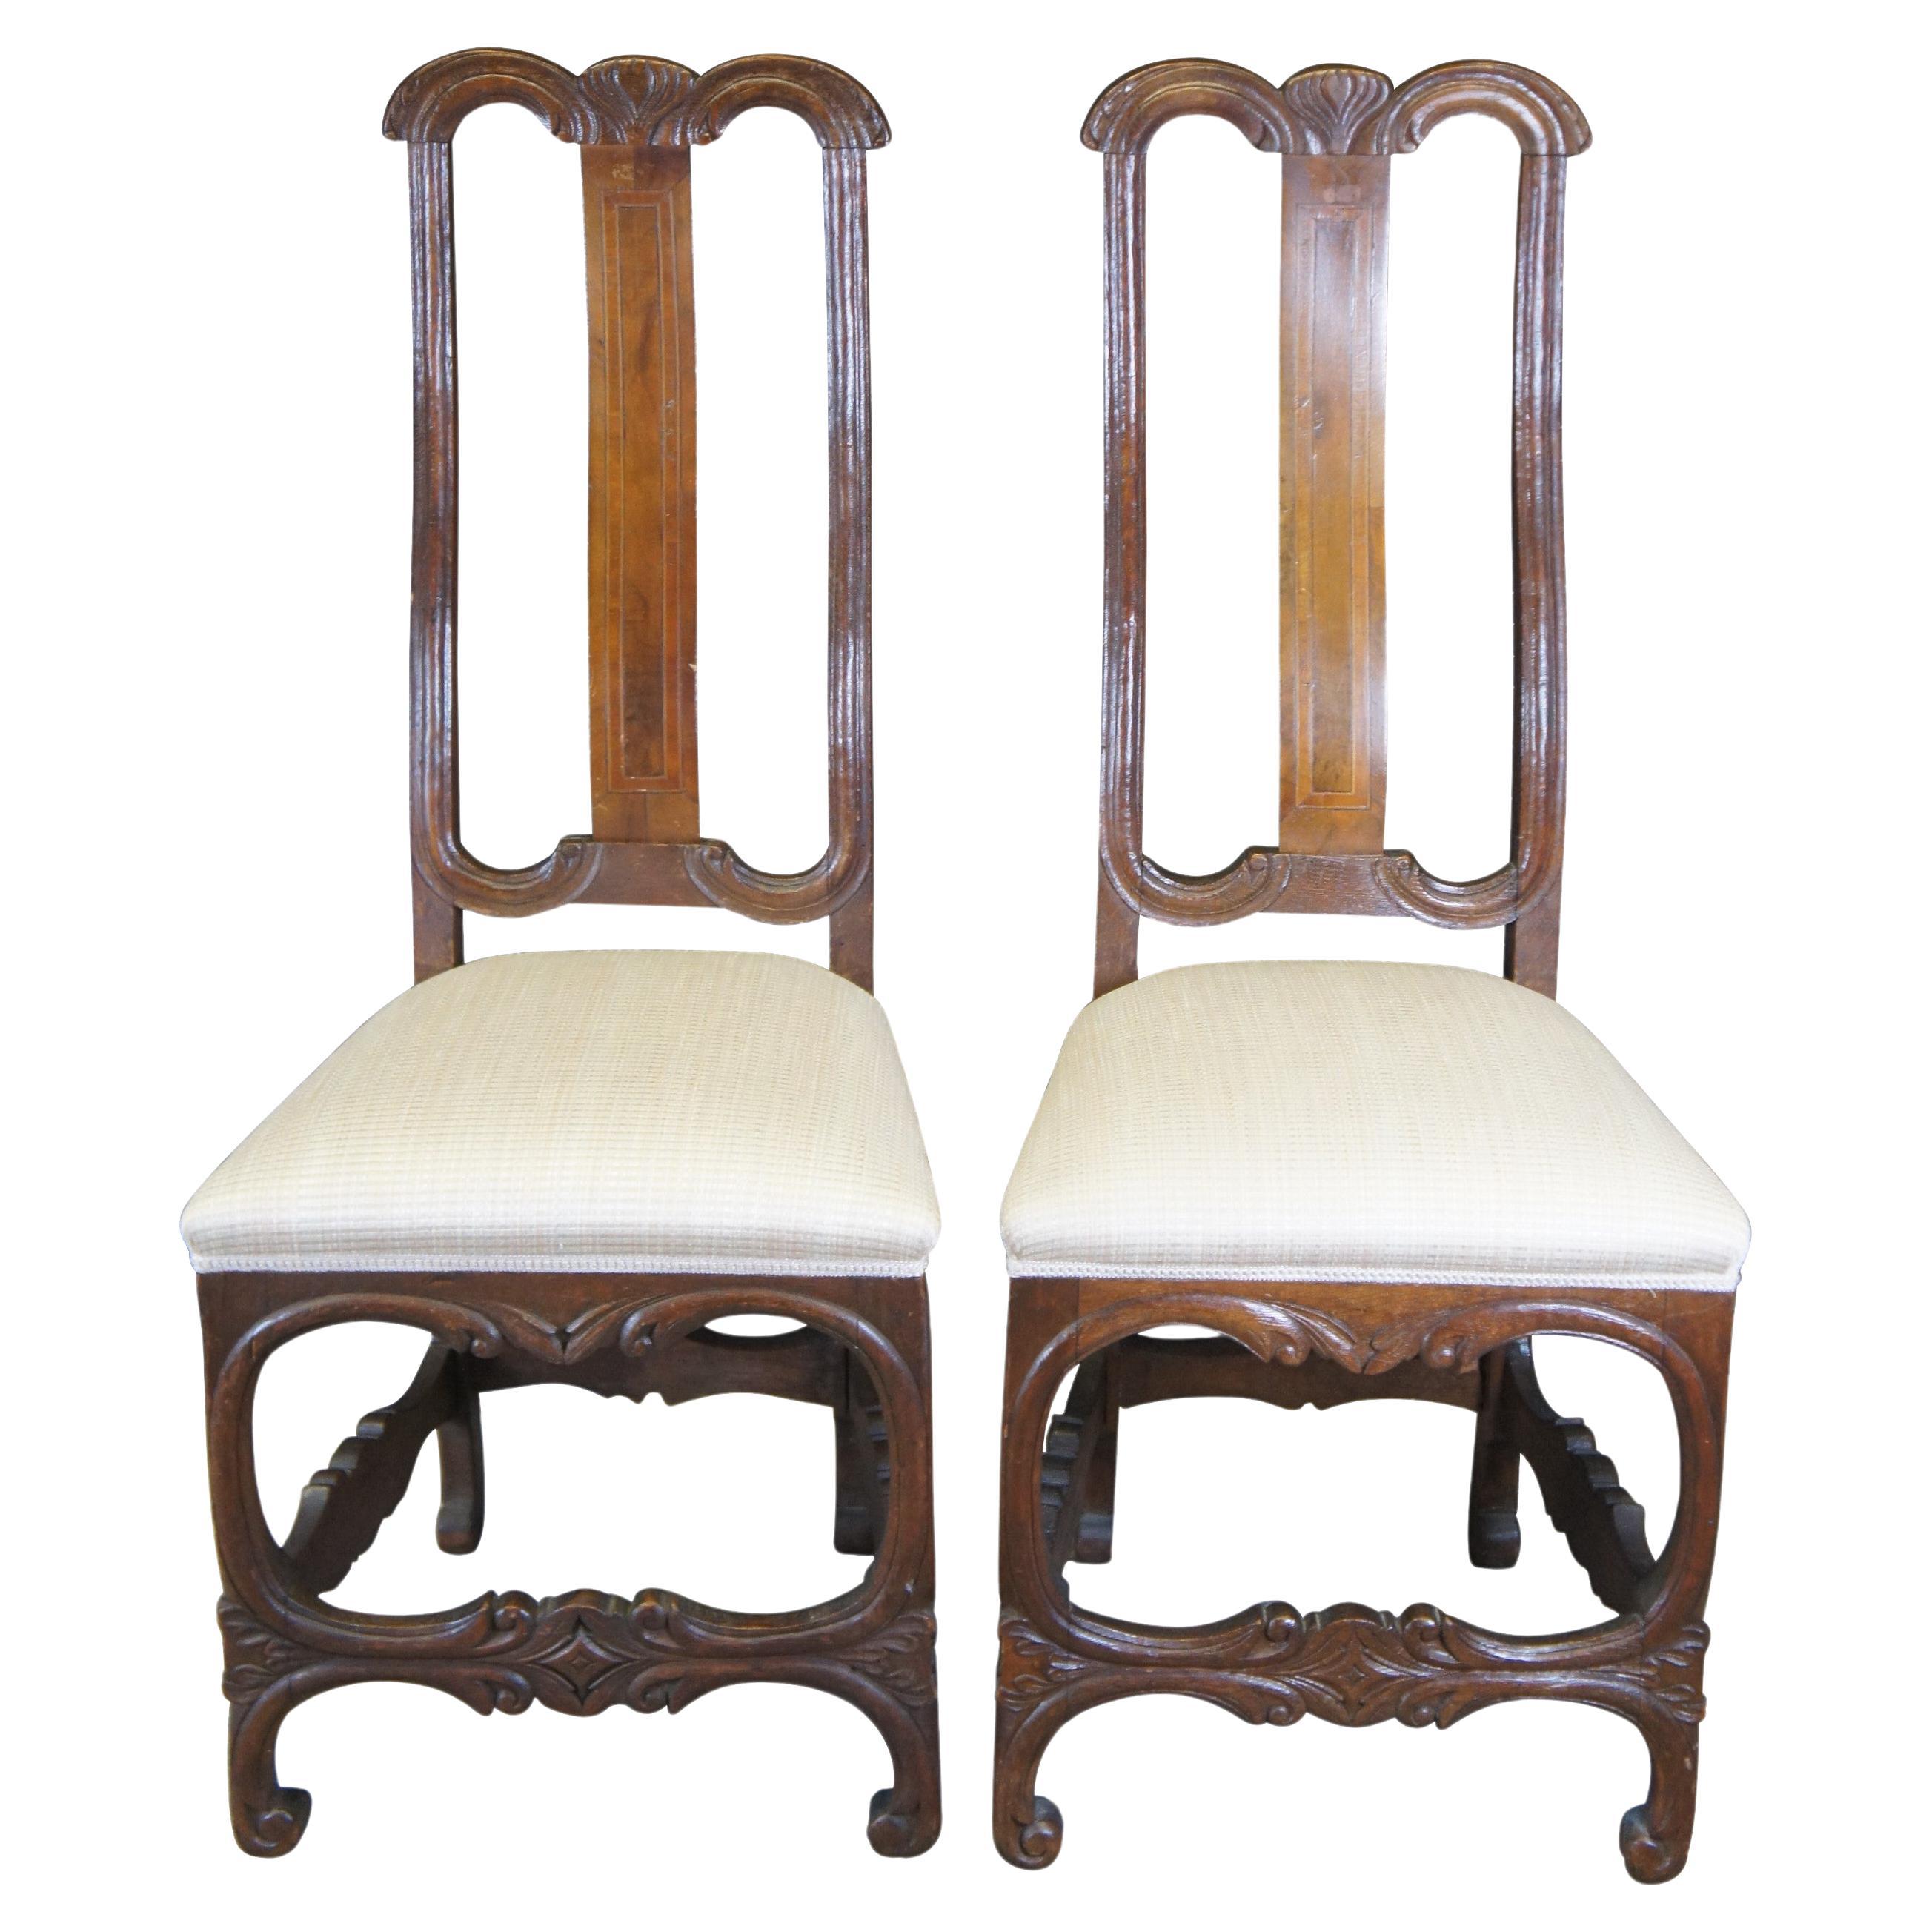 2 Antique German Baroque Carved Oak & Mahogany Inlaid Dining Chairs